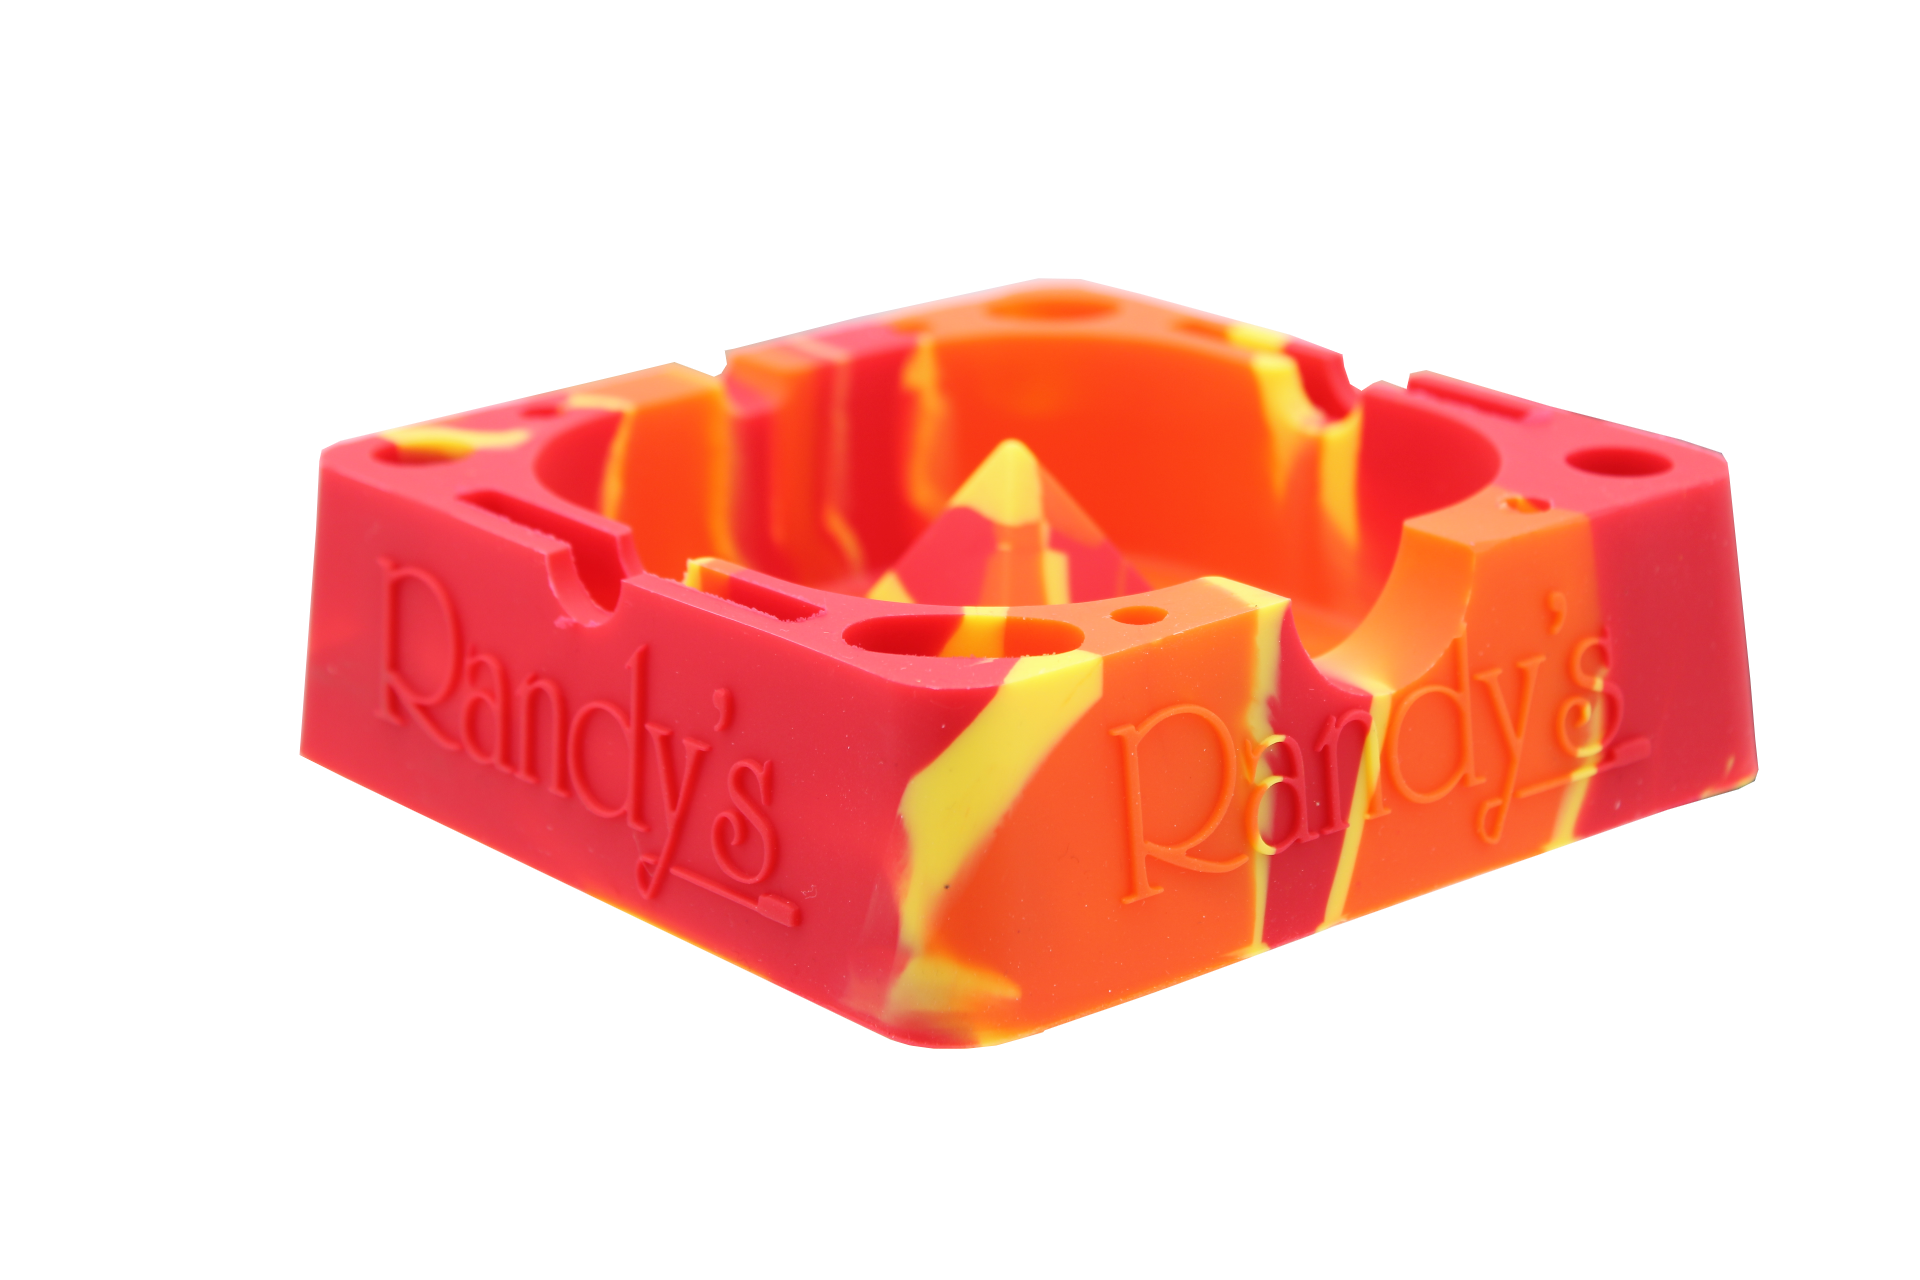 RANDYS 7" SQUARE ASSORTED SILICONE ASHTRAY EACH